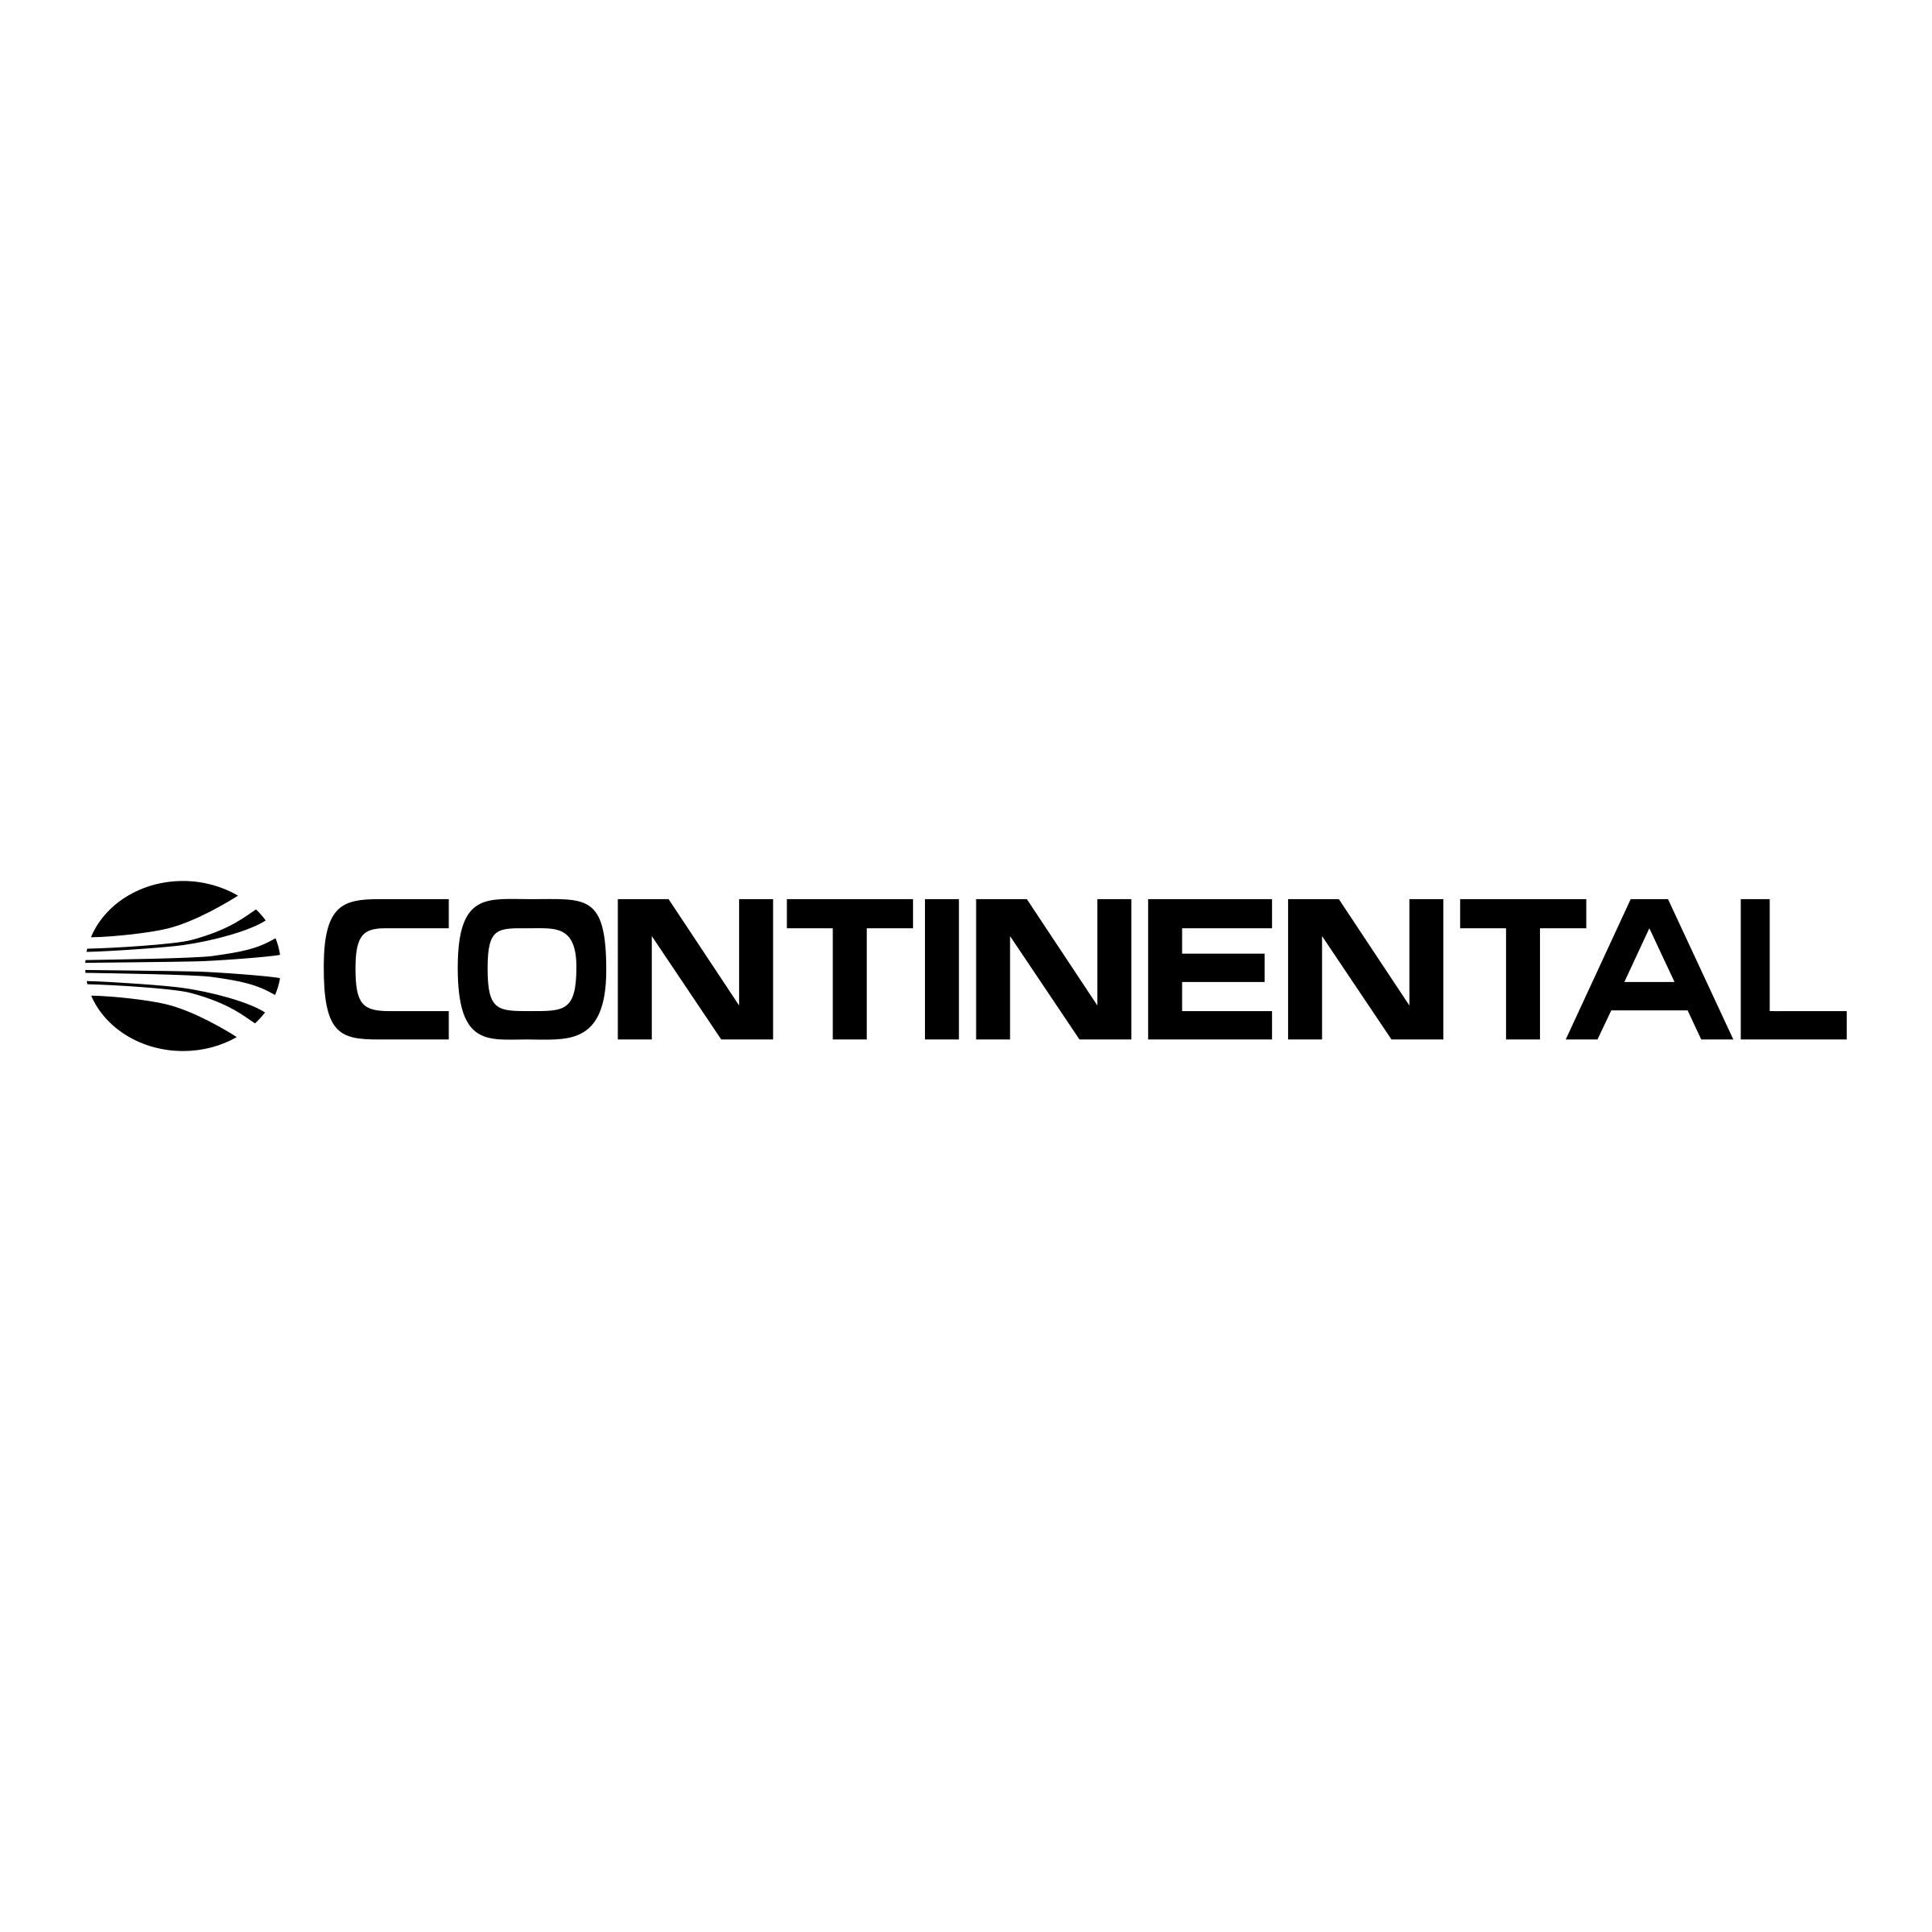 Continental Airlines Logo - Continental Airlines Logo PNG Transparent & SVG Vector - Freebie Supply